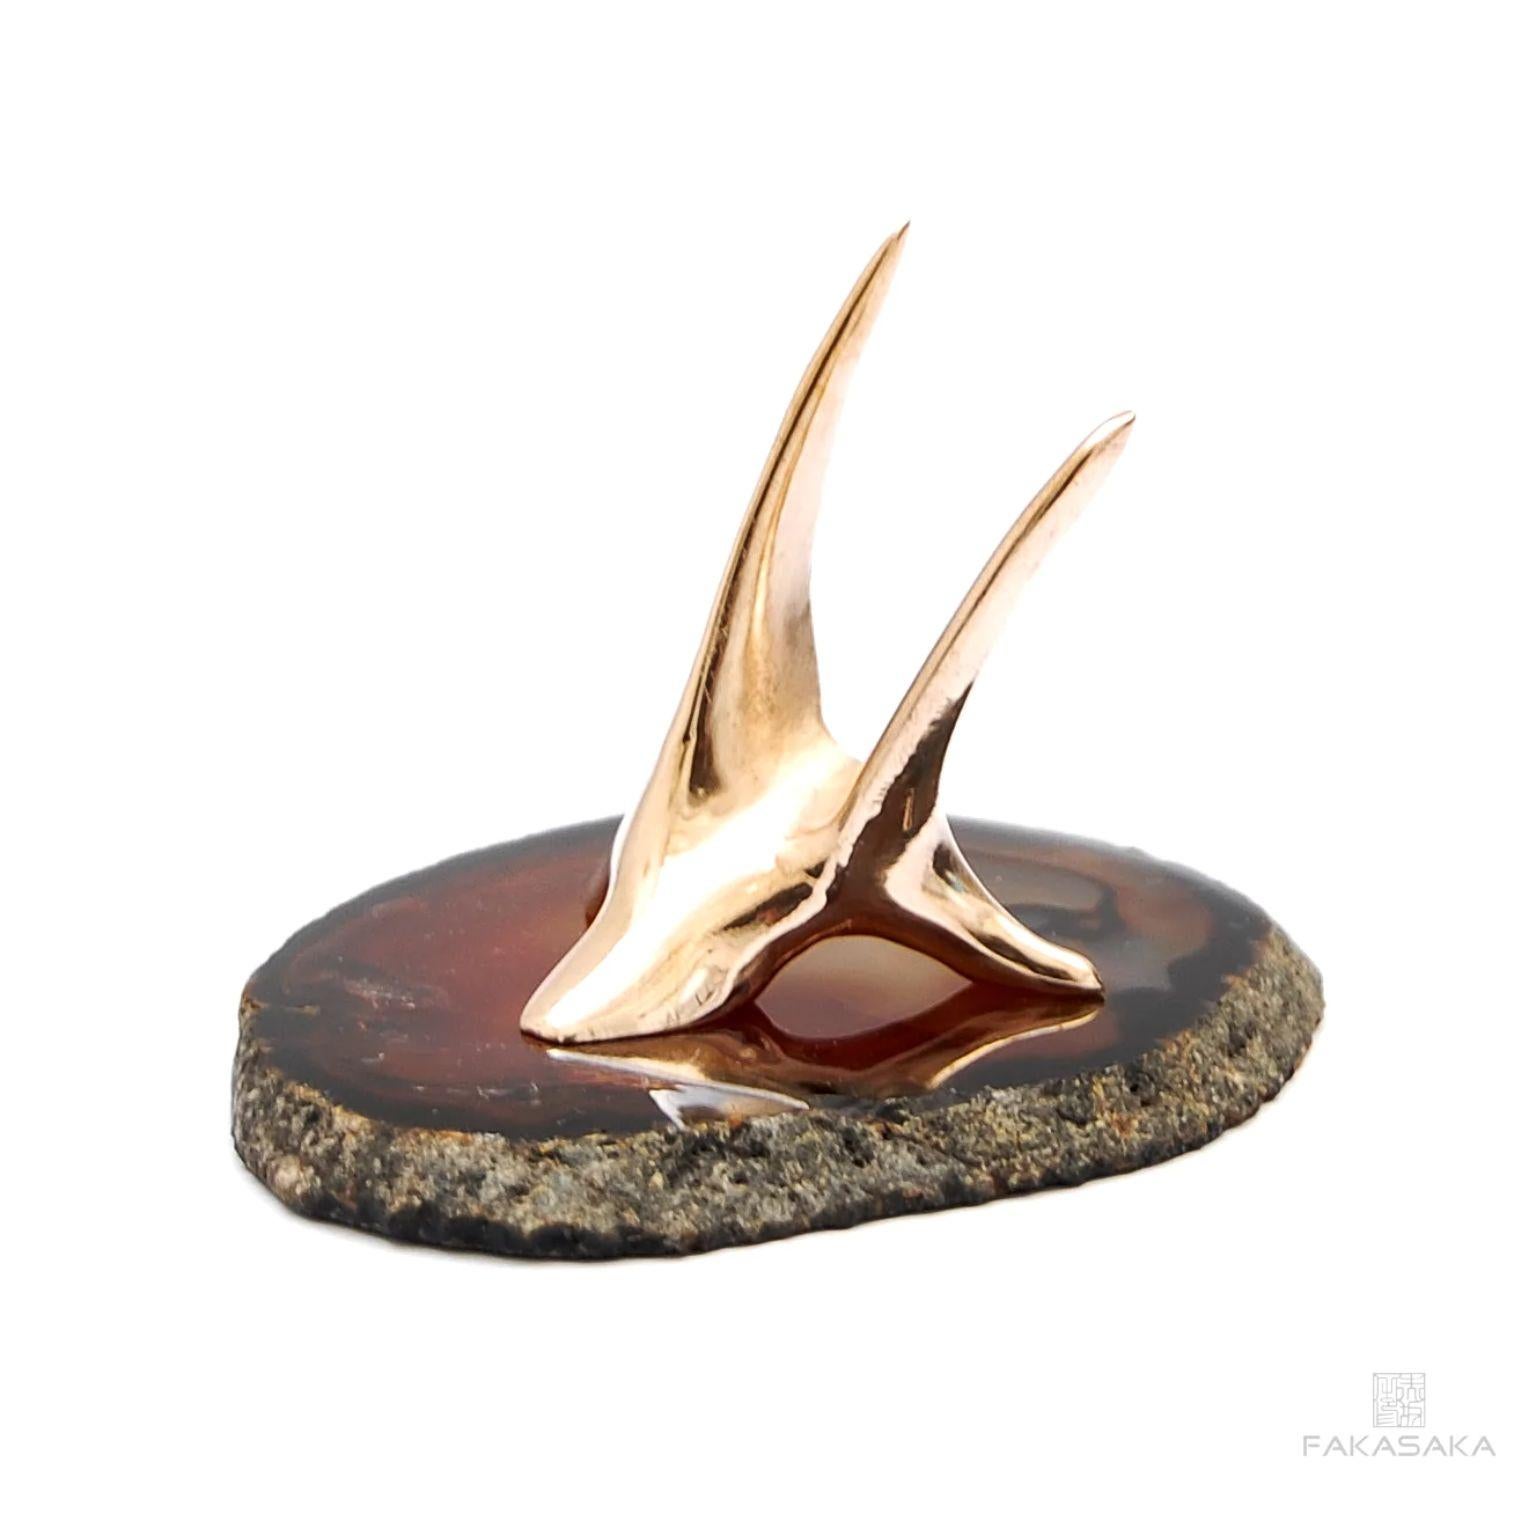 Horn 1 sculpture by Fakasaka Design
Dimensions: W 8 cm D 6 cm H 7 cm
Materials: polished bronze.

Horn 1
Paper weight / sculpture

 FAKASAKA is a design company focused on production of high-end furniture, lighting, decorative objects,